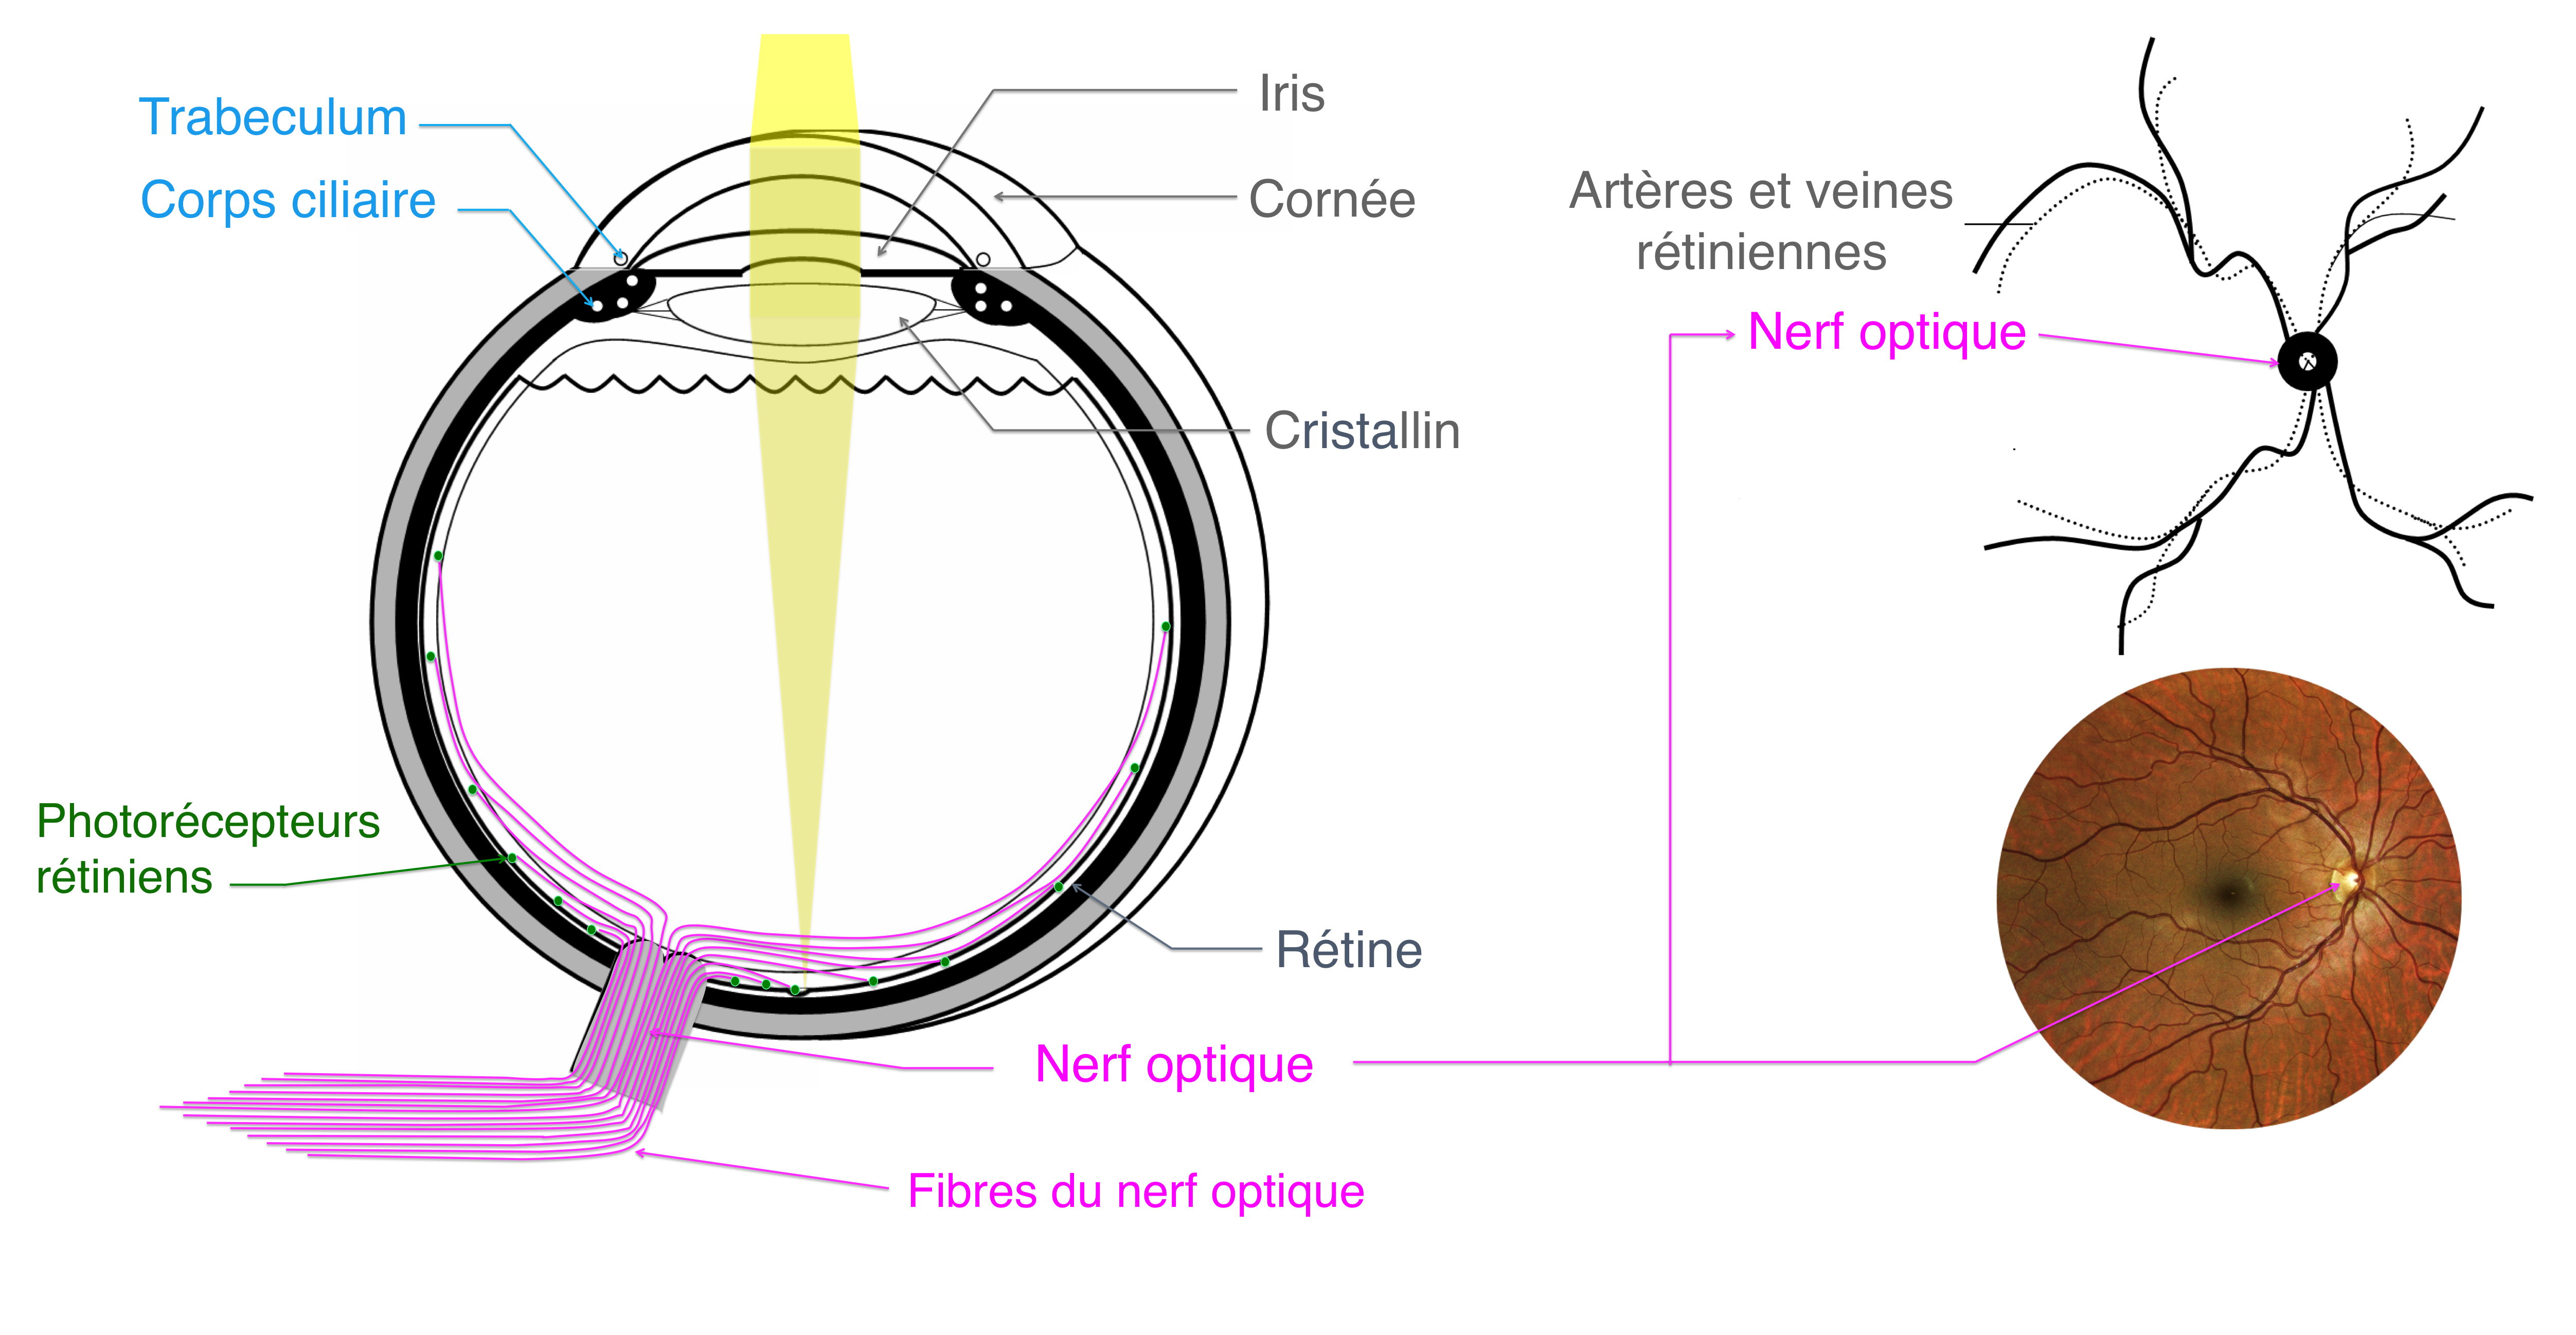 hypertonies intra oculaires et glaucomes : bases anatomiques